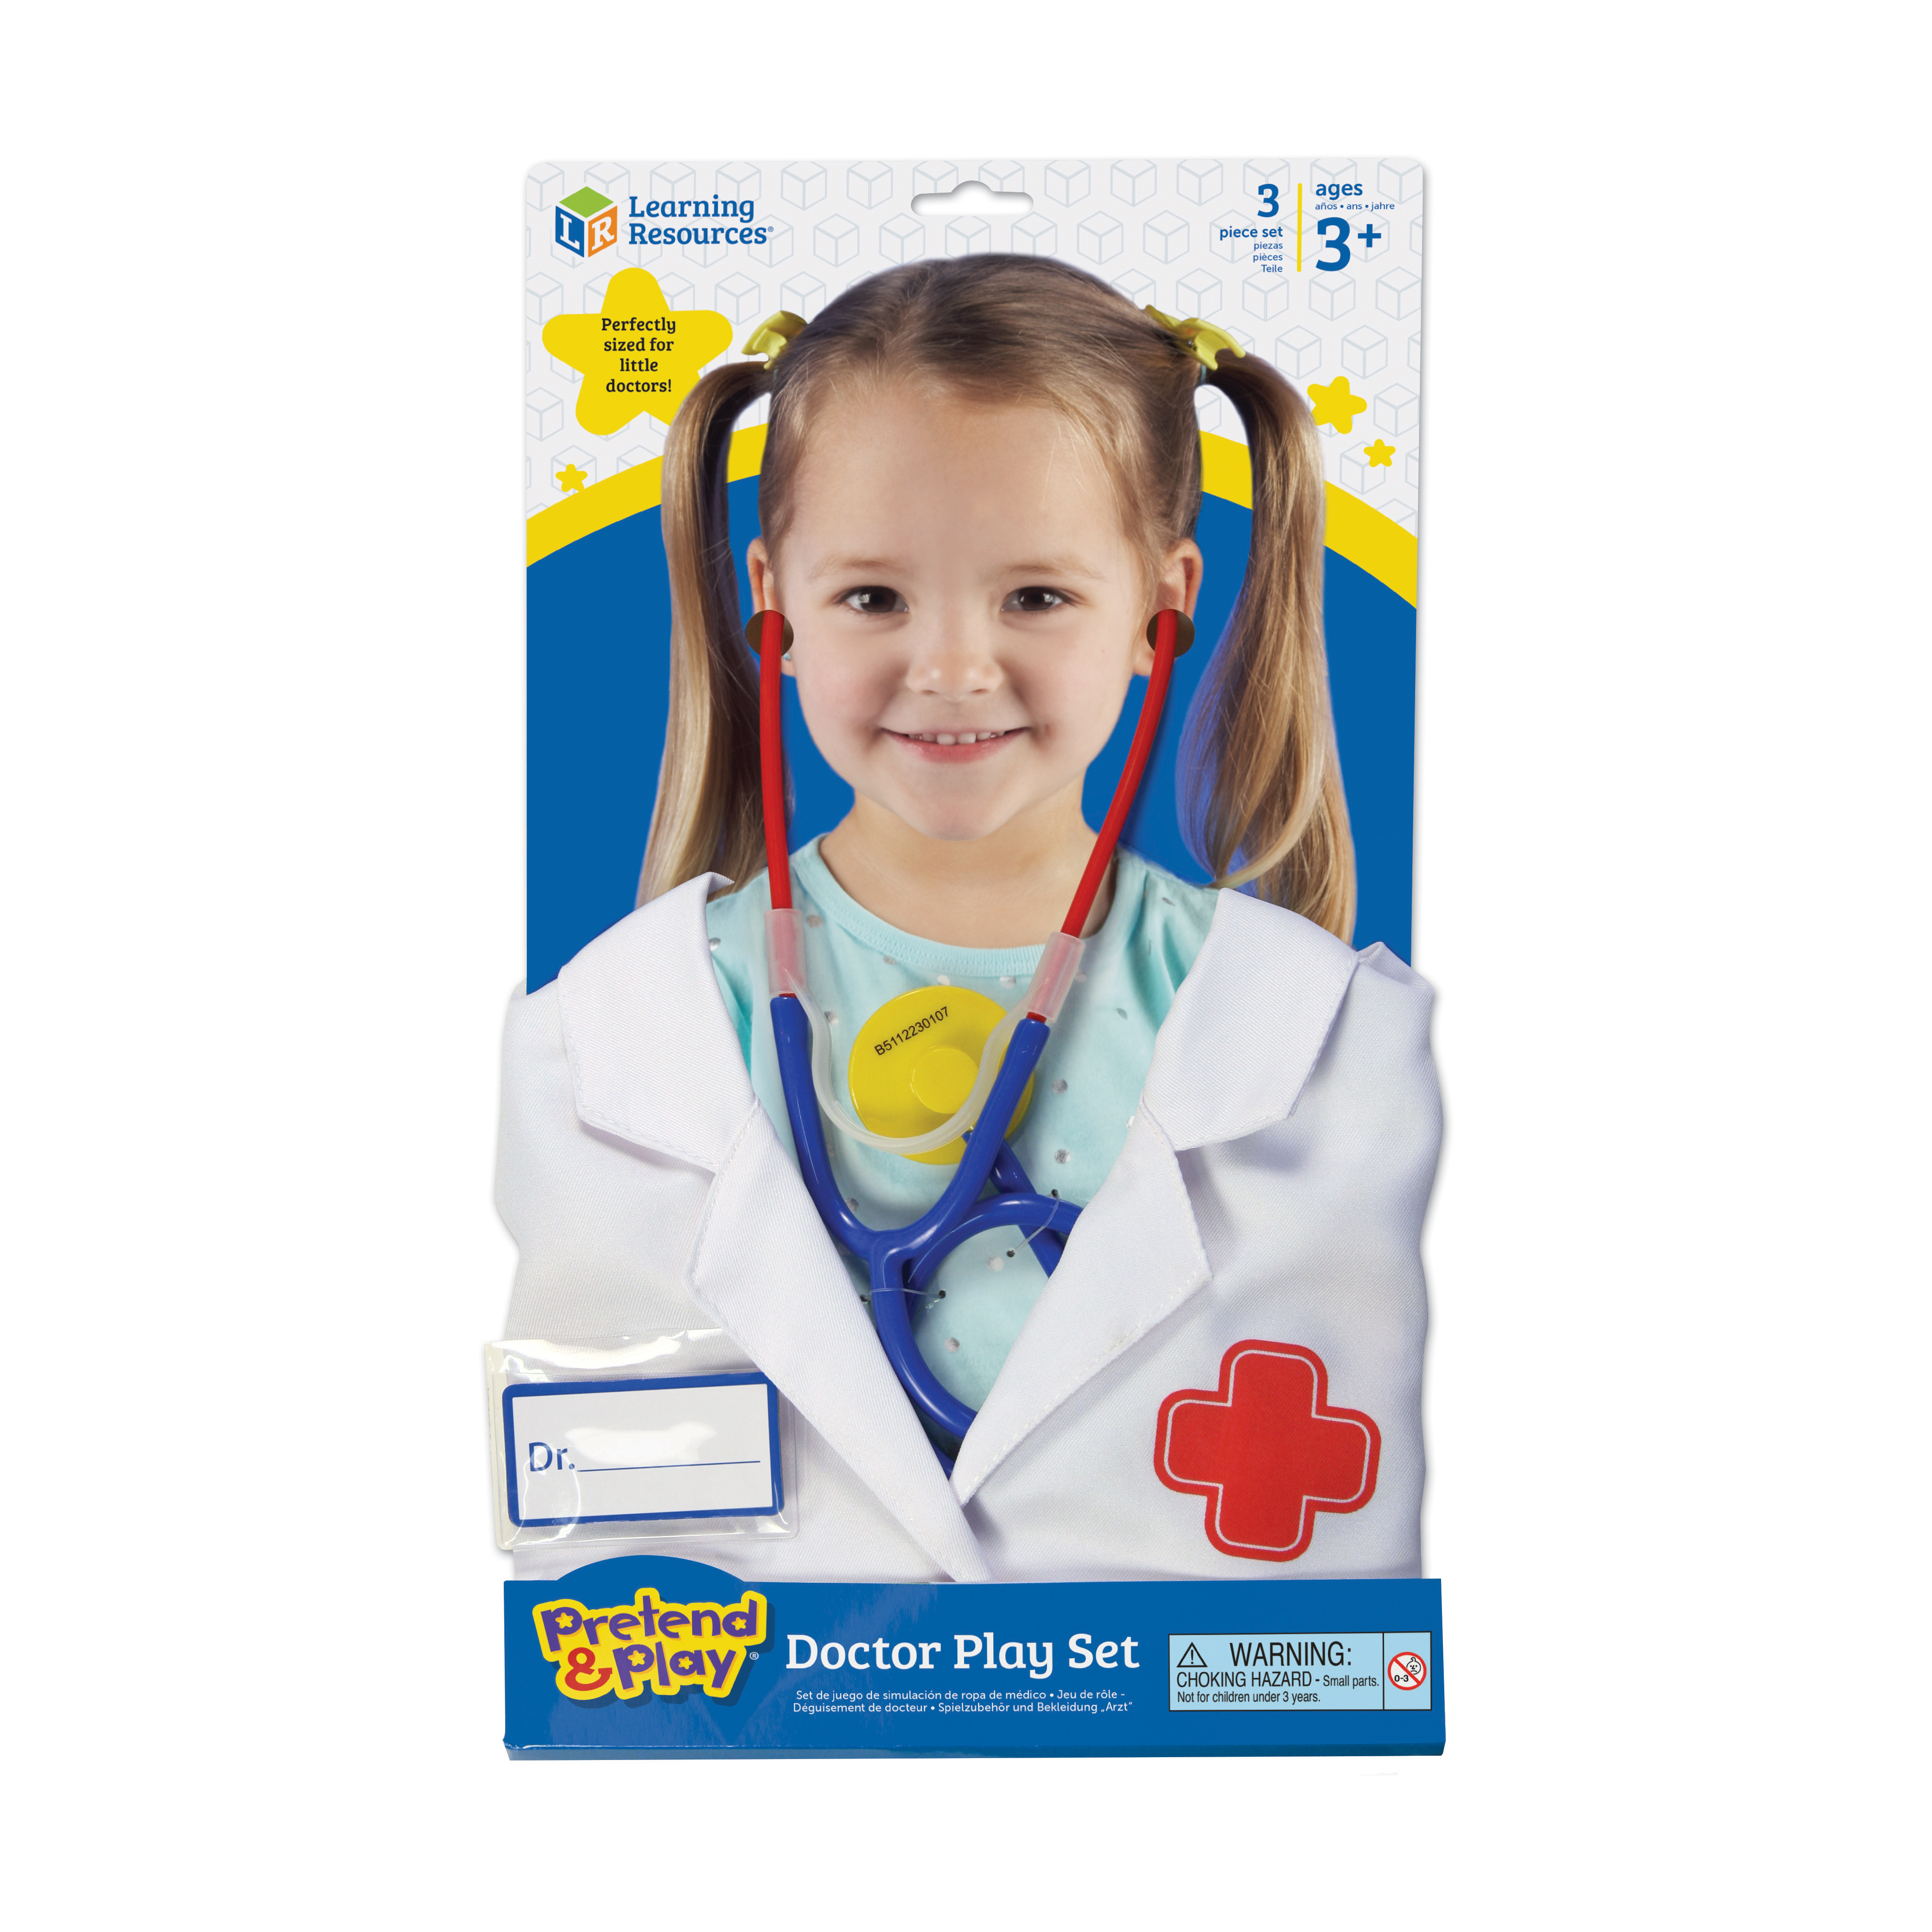 Learning Resources Pretend & Play - Doctor Play Set